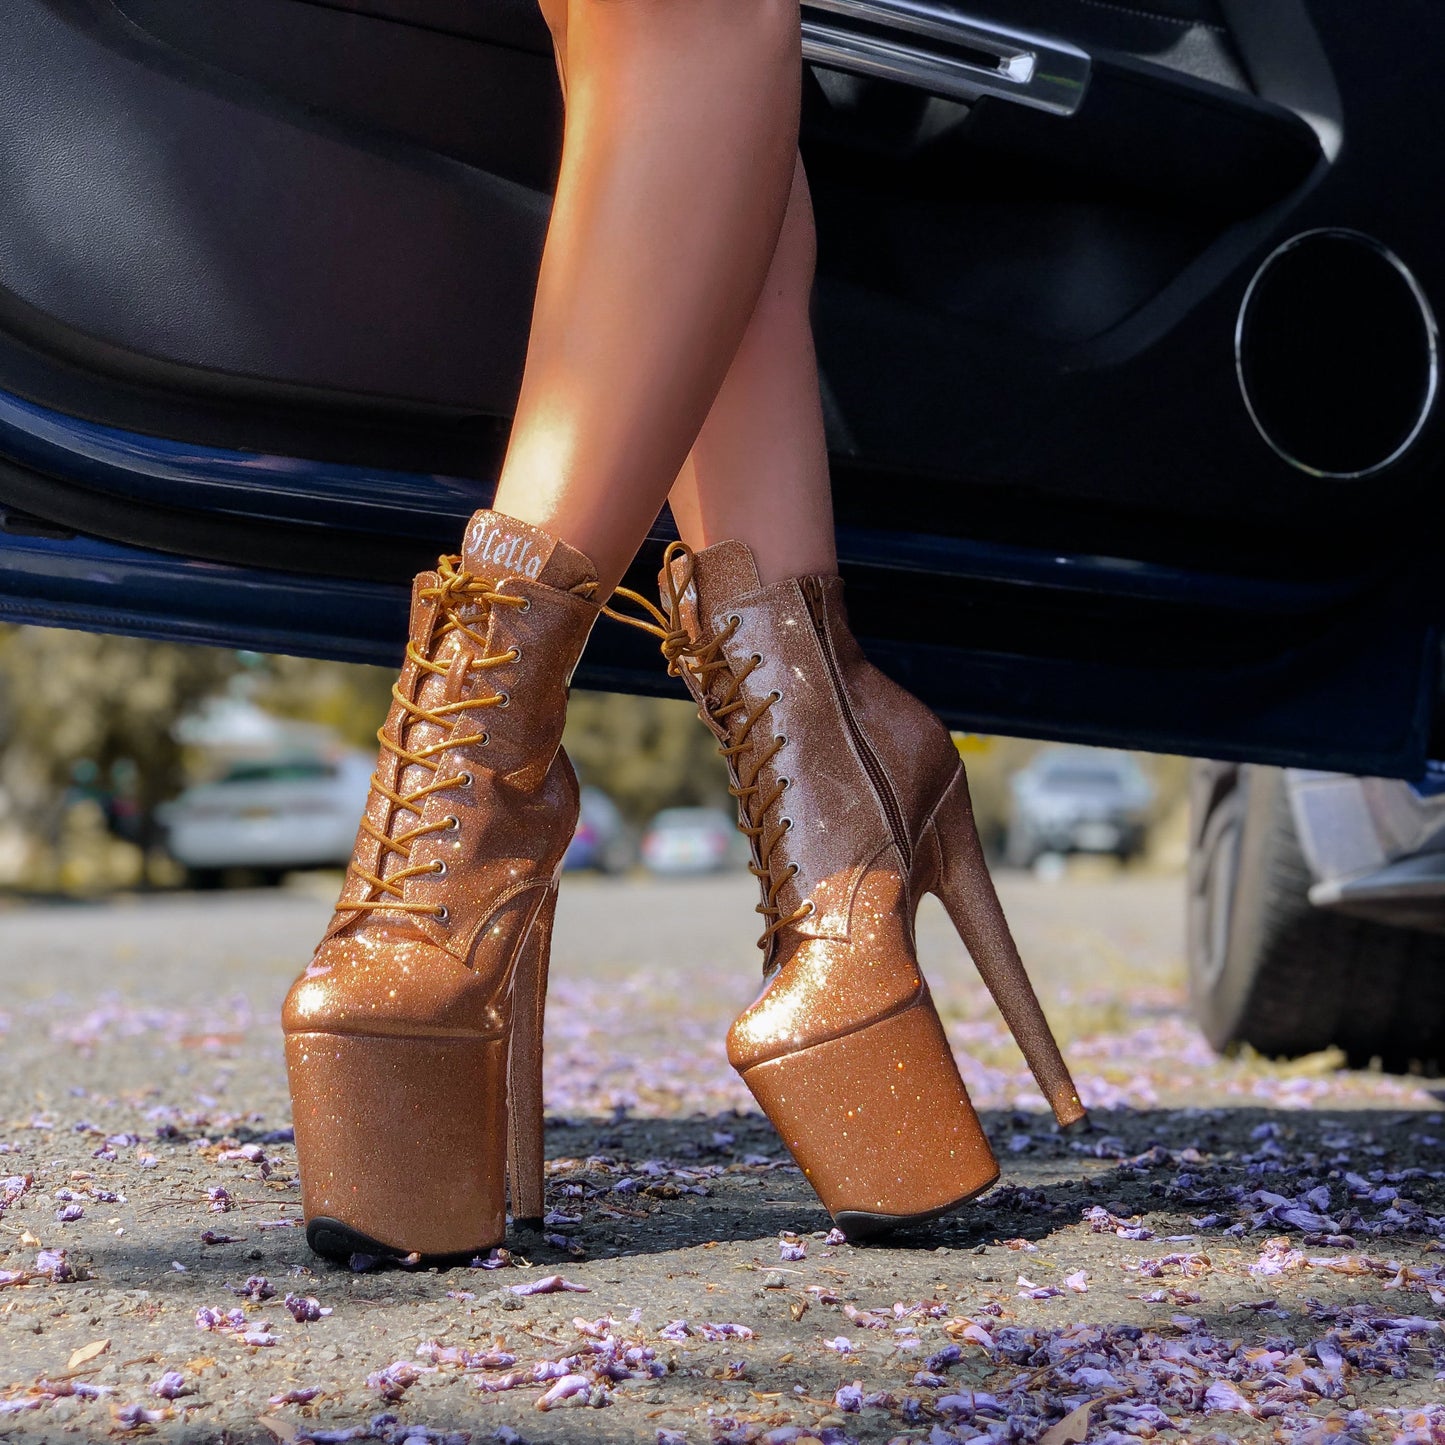 The Glitterati Ankle Boot - Oh Honey - 8 INCH